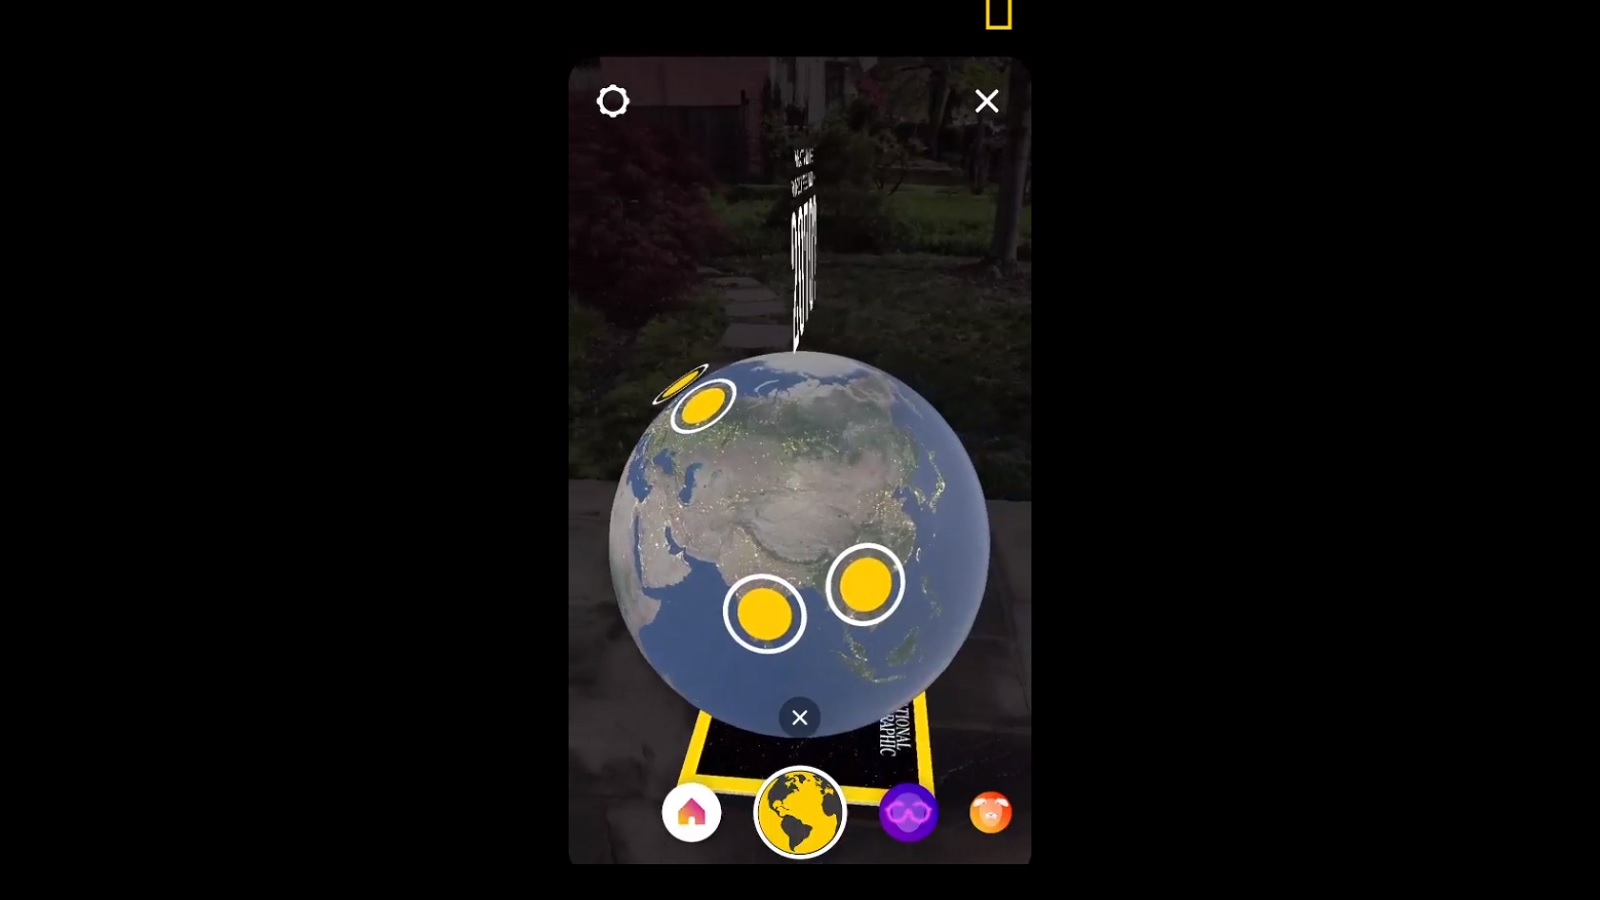 Earth’s Fate Reflected in AR-Enabled Orbuculum